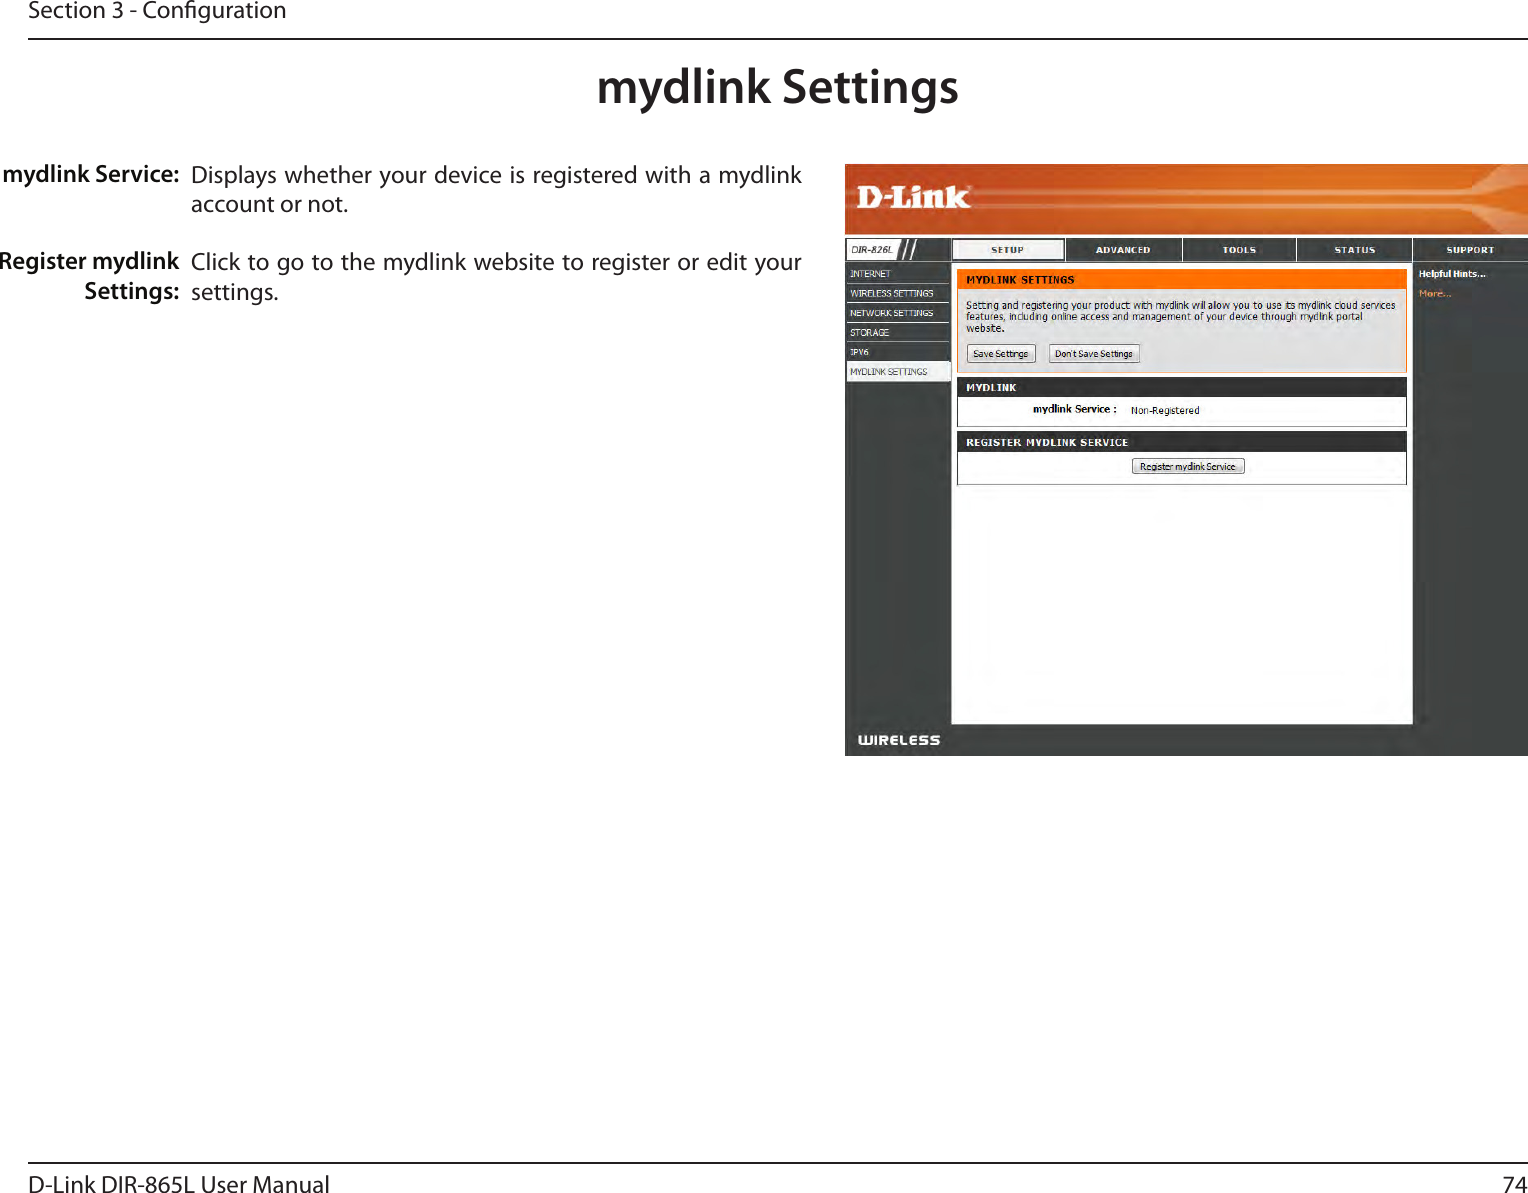 74D-Link DIR-865L User ManualSection 3 - Congurationmydlink SettingsDisplays whether your device is registered with a mydlink account or not.Click to go to the mydlink website to register or edit your settings.mydlink Service:Register mydlink Settings: